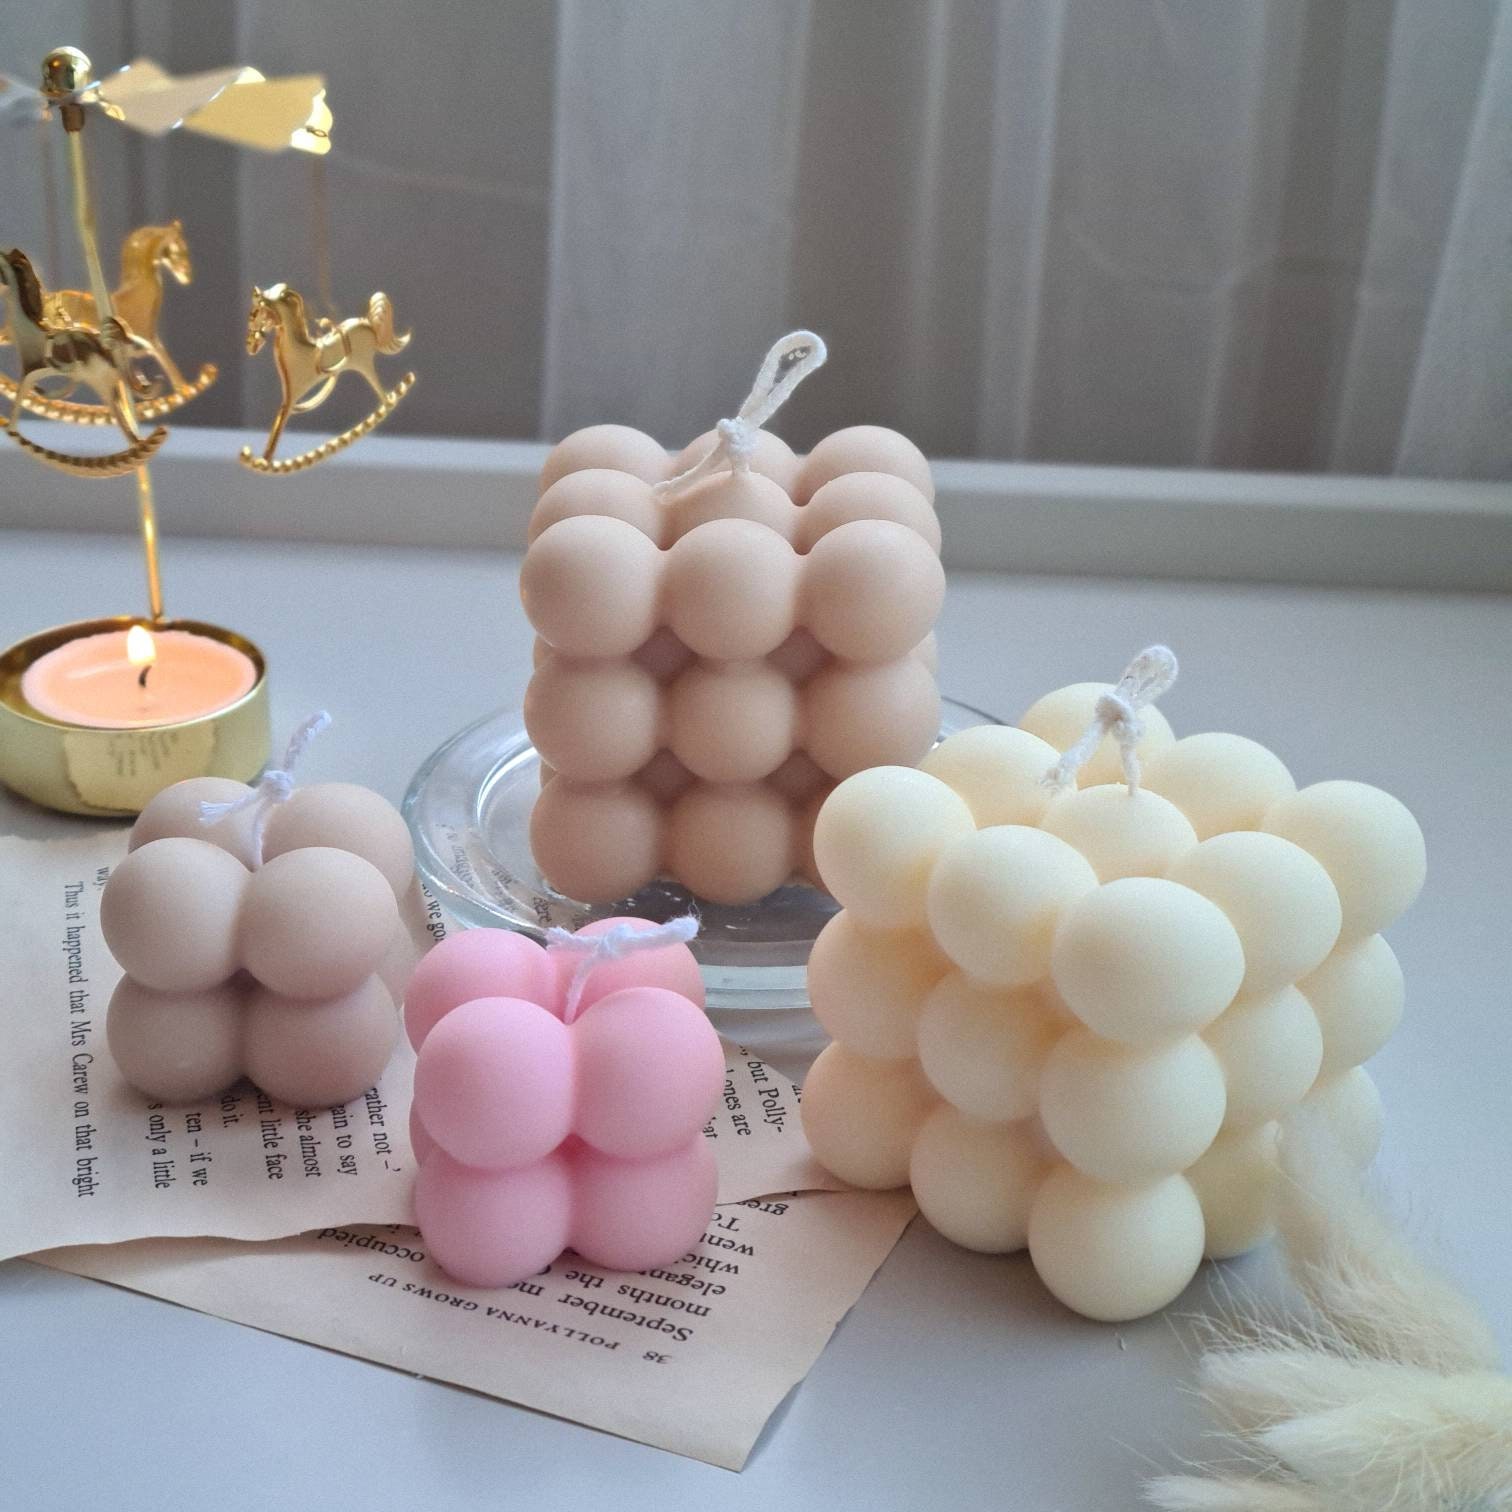  Bubble Cube Candle - Sculptural Handmade Rubix Cube Candle -  Lemon Marshmallow Scented Soy + Coconut Blend Wax with 100% Cotton Wick -  Cloud Molecule Candle - Small Batch - Made